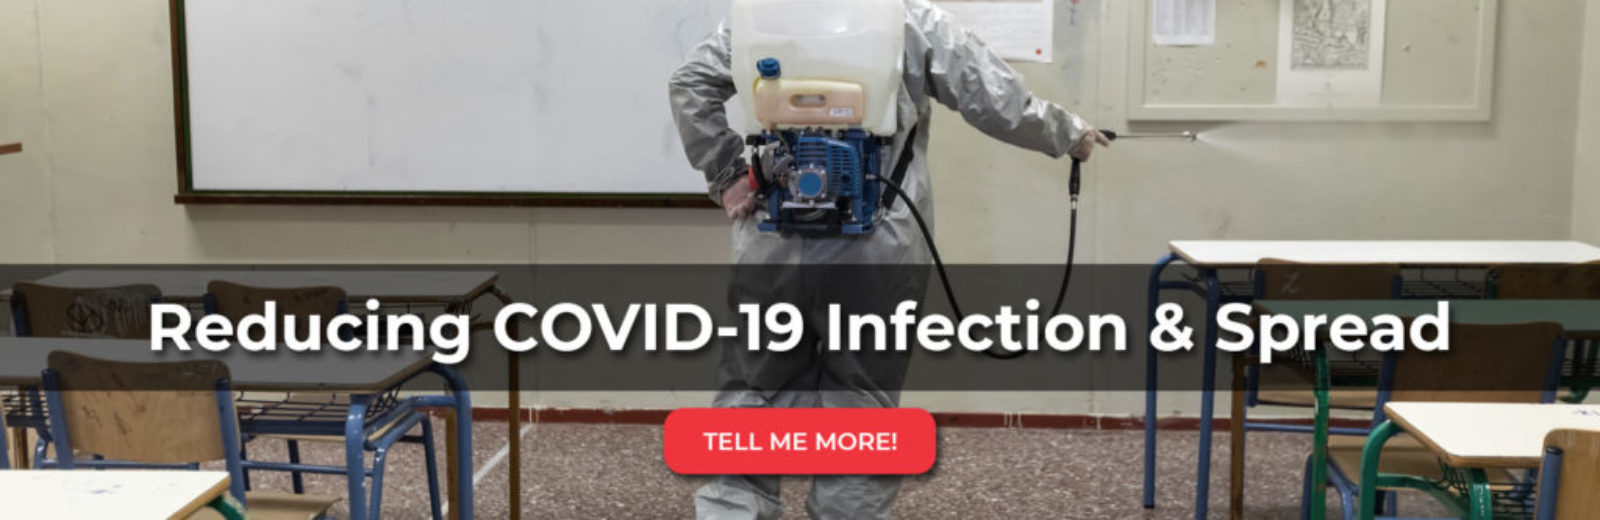 Reduce COVID-19 infection and spread banner image